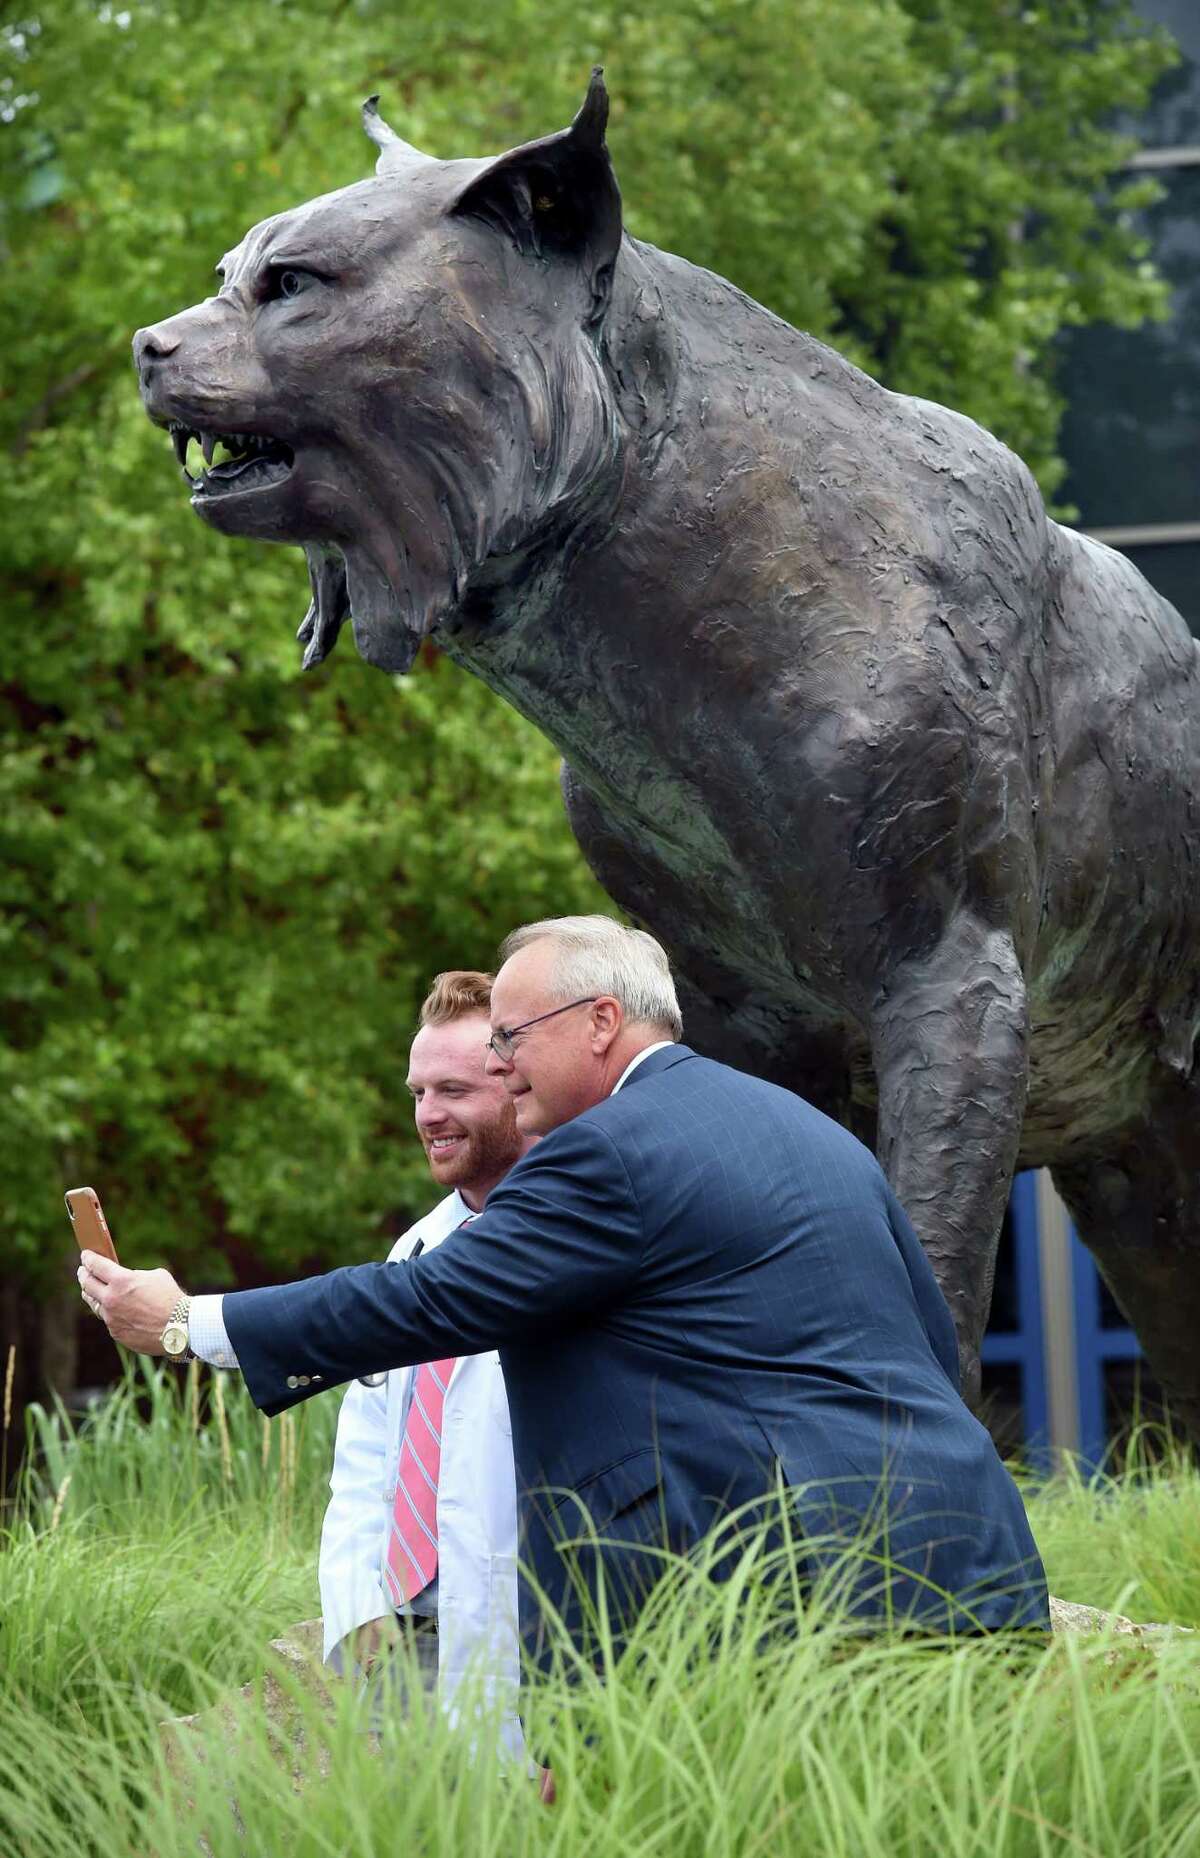 John Baekey, left, takes a photograph with his father, Greg Baekey, of Fairfield under the bobcat statue in front of Quinnipiac University's People's United Center in Hamden after the class of 2025 White Coat Ceremony Aug. 5, 2021.